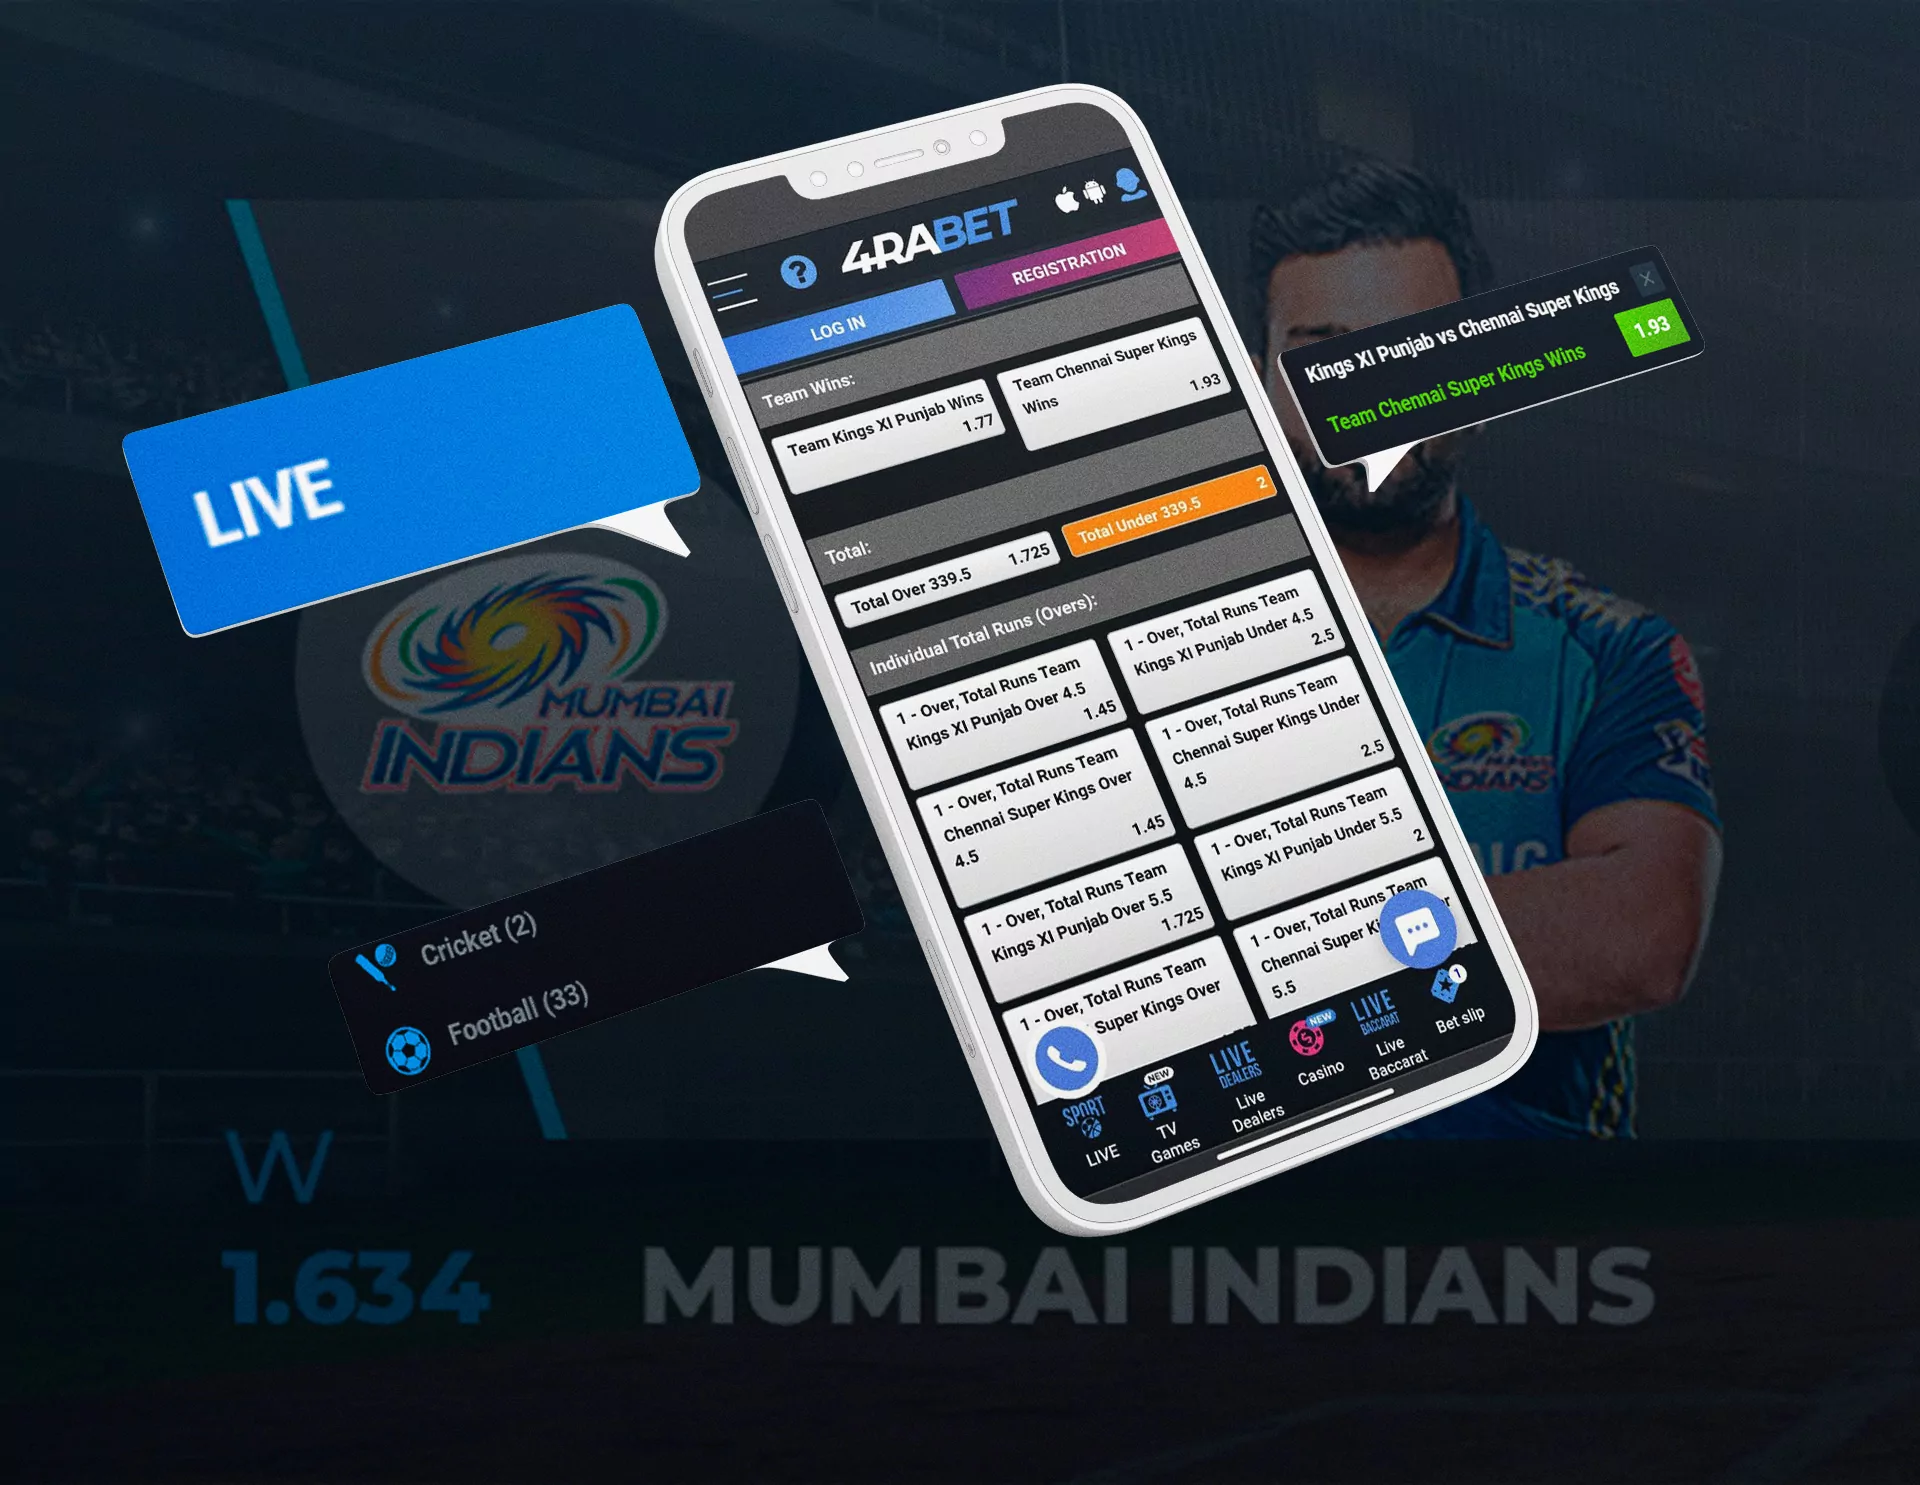 You should register at 4rabet and top up your account to place bets on cricket via your mobile phone.